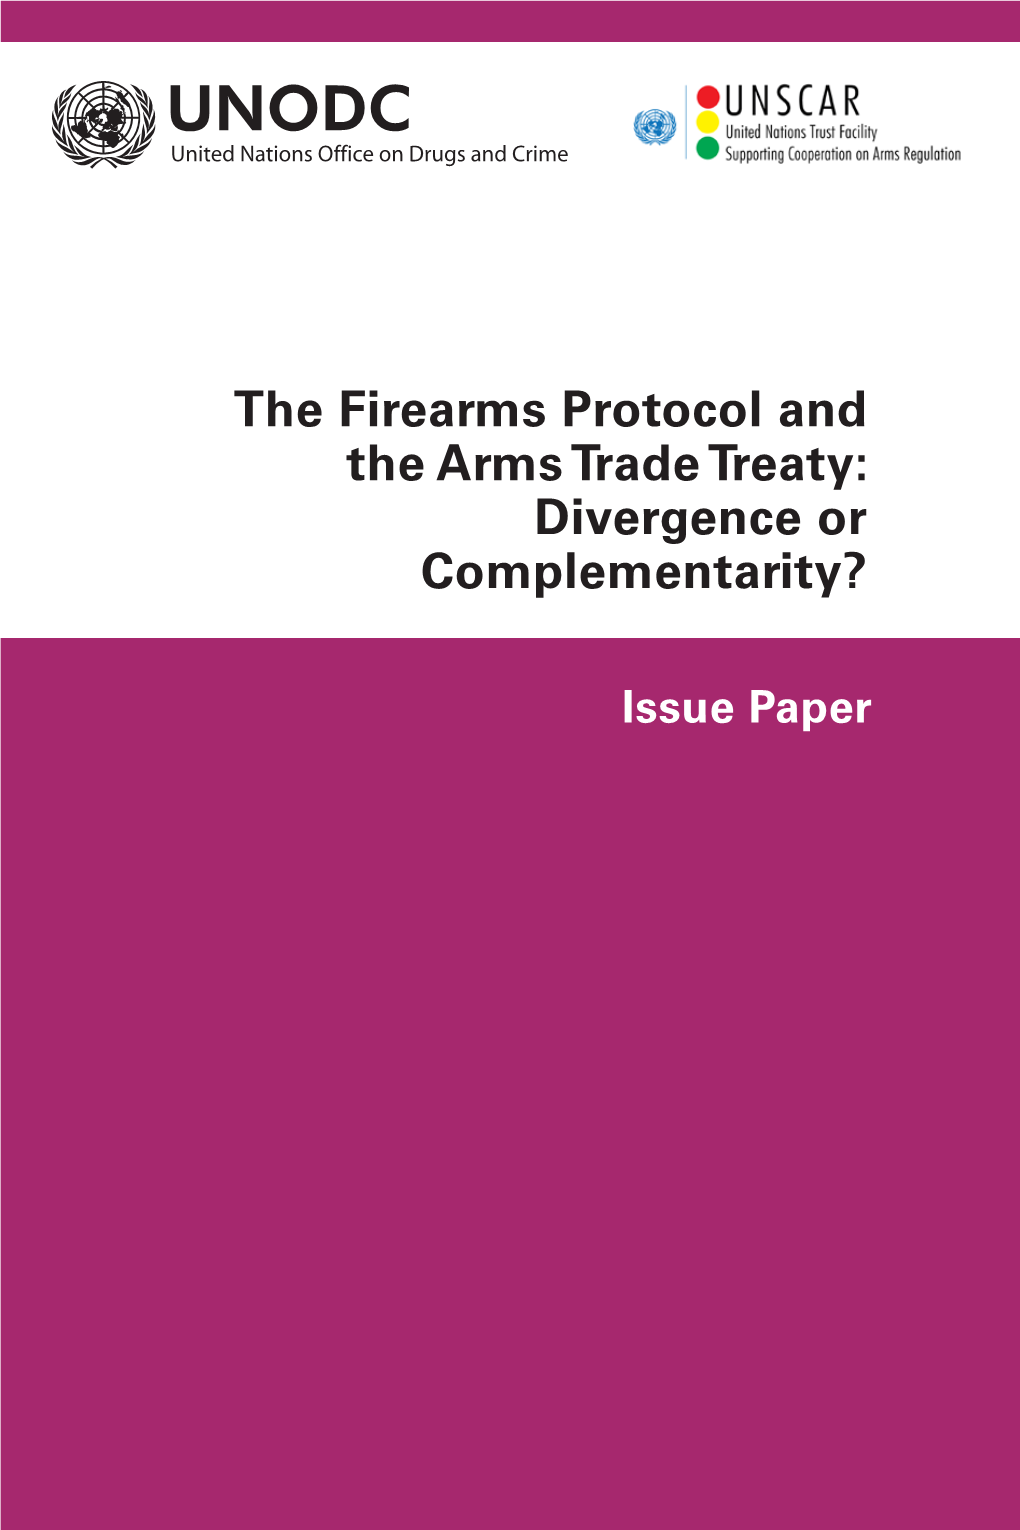 The Firearms Protocol and the Arms Trade Treaty: Divergence Or Complementarity?